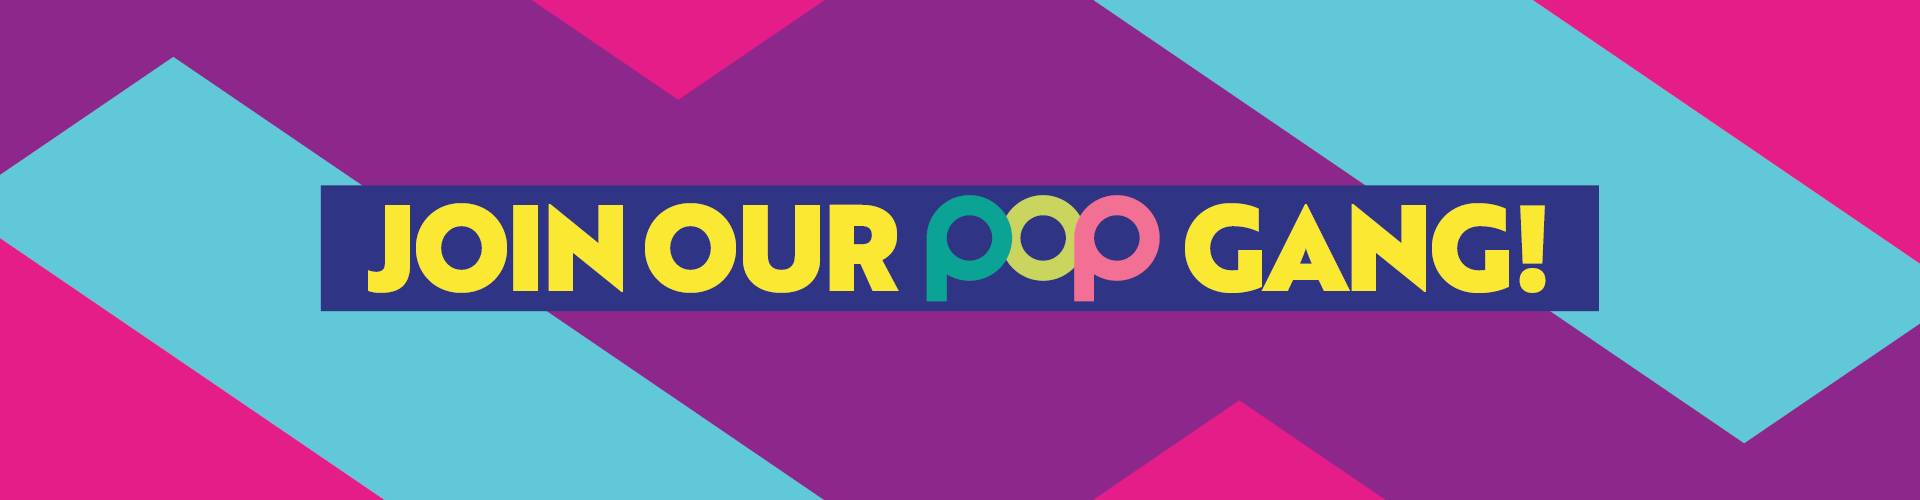 Join our Popworld Norwich gang! Sign up today